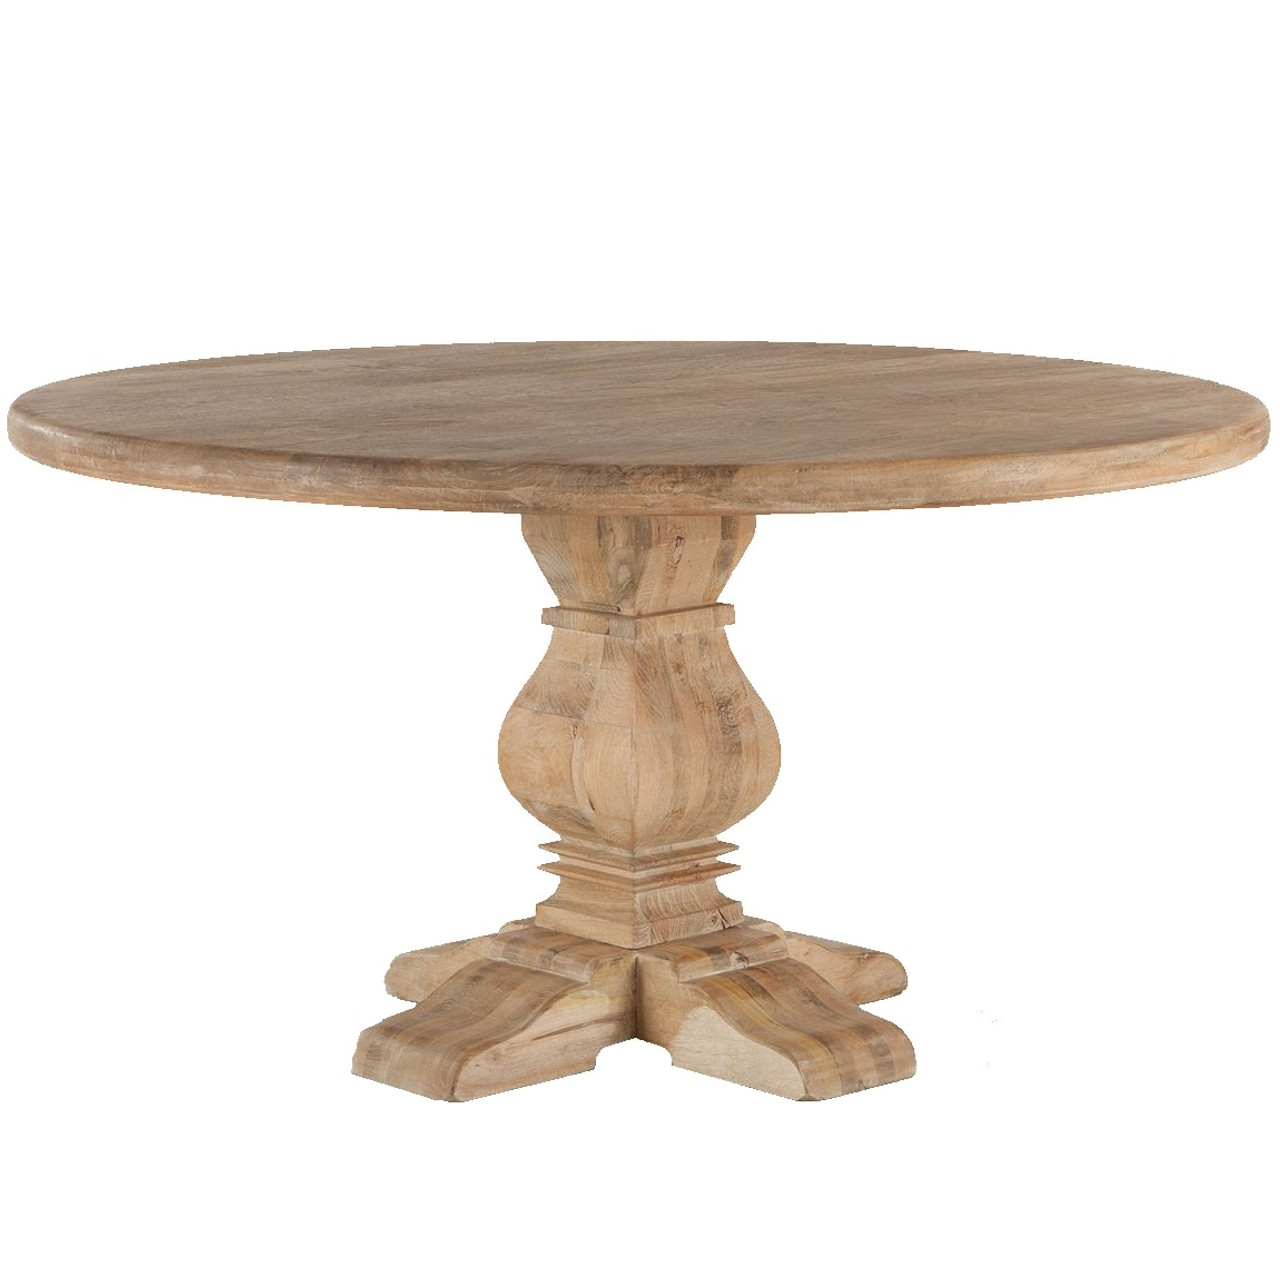 French Farmhouse Trestle Round Dining Table 54" | Zin Home